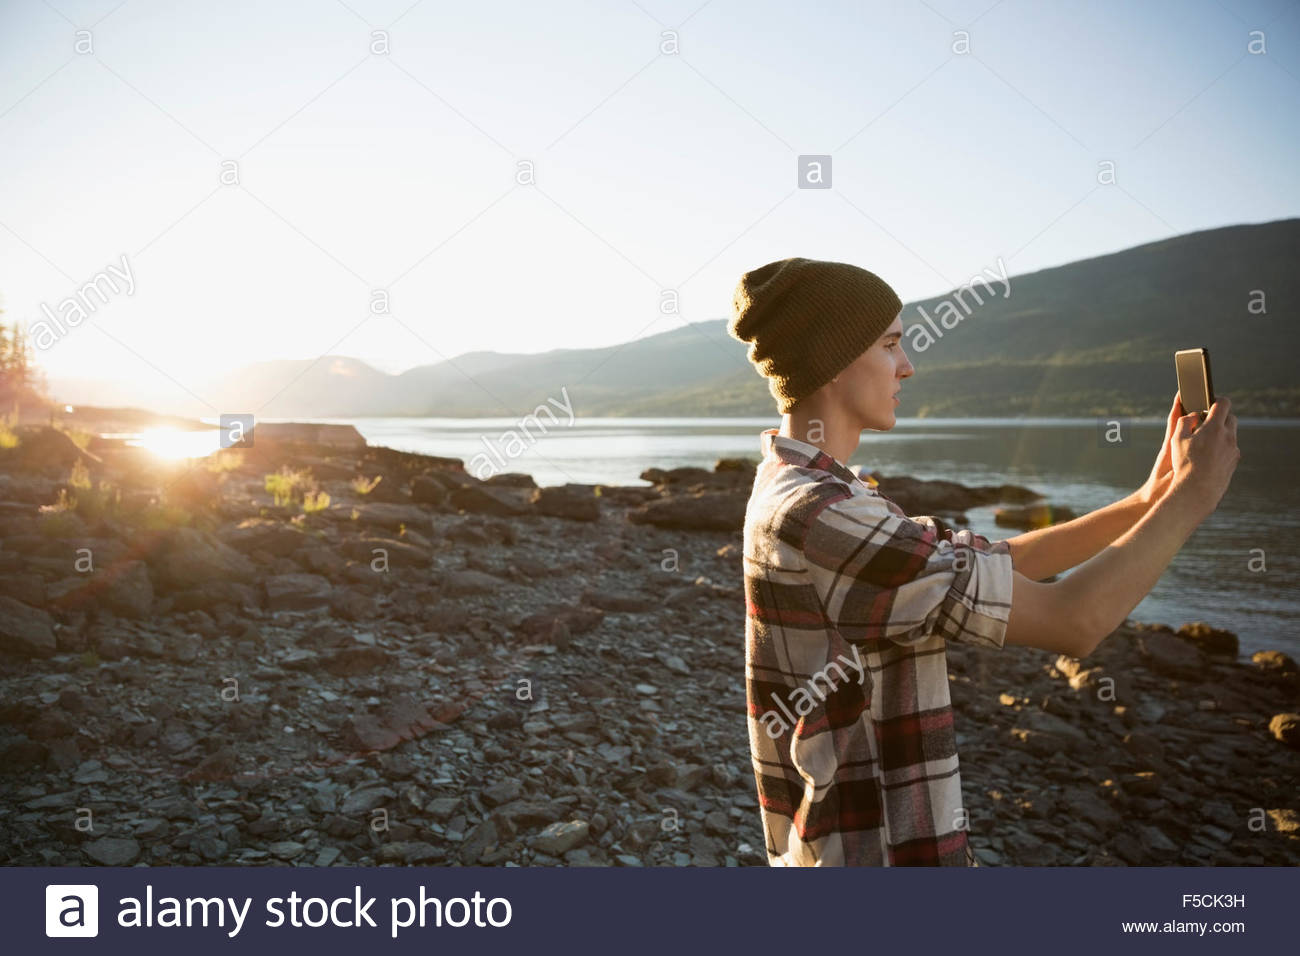 Young man photographing lake Stock Photo